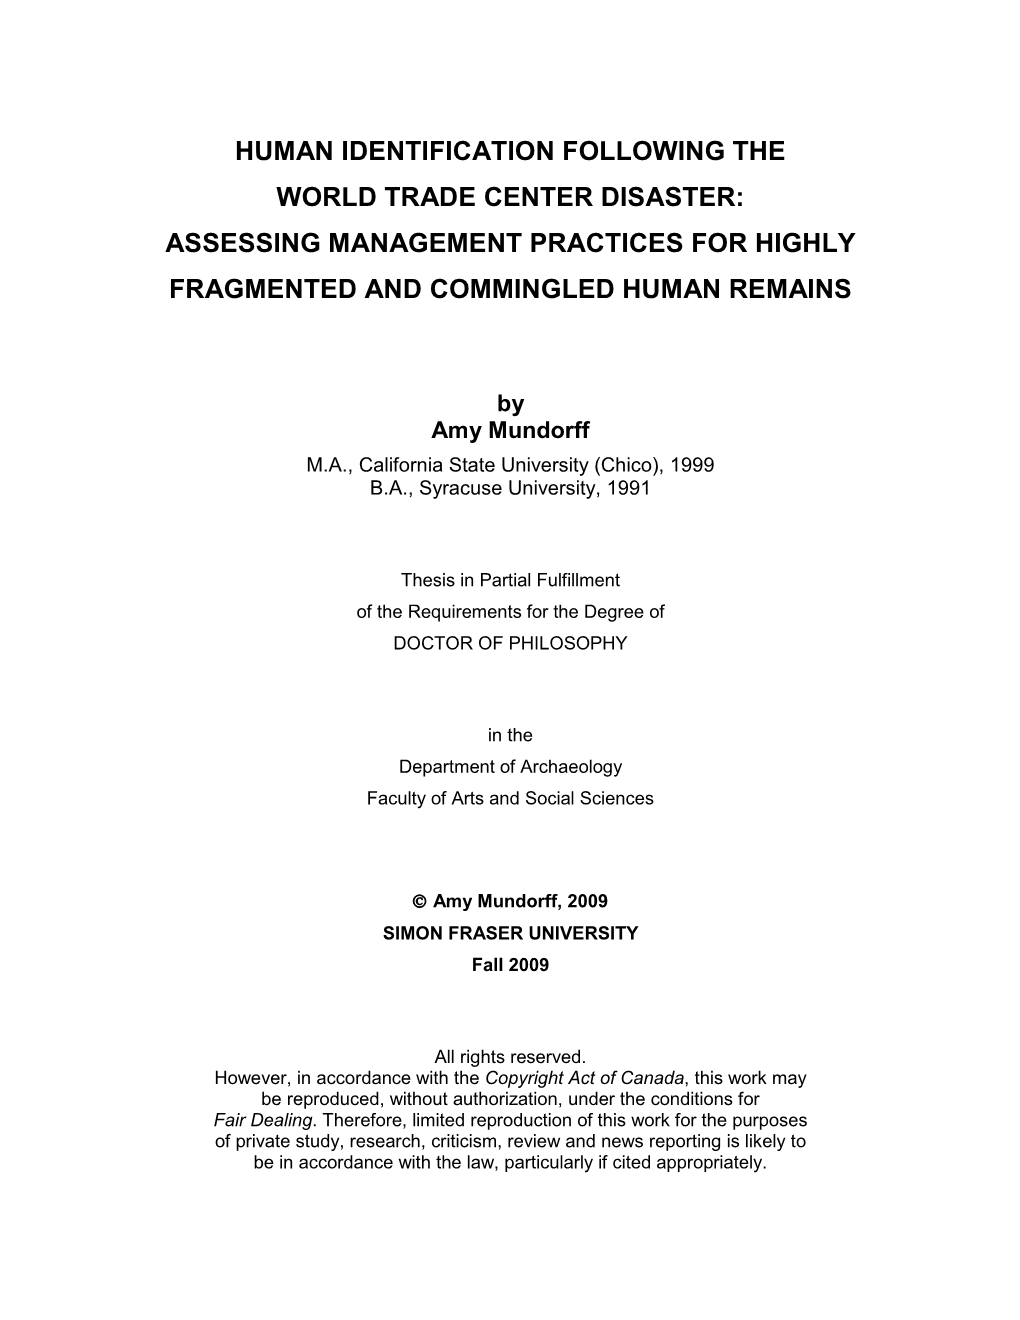 Human Identification Following the World Trade Center Disaster: Assessing Management Practices for Highly Fragmented and Commingled Human Remains